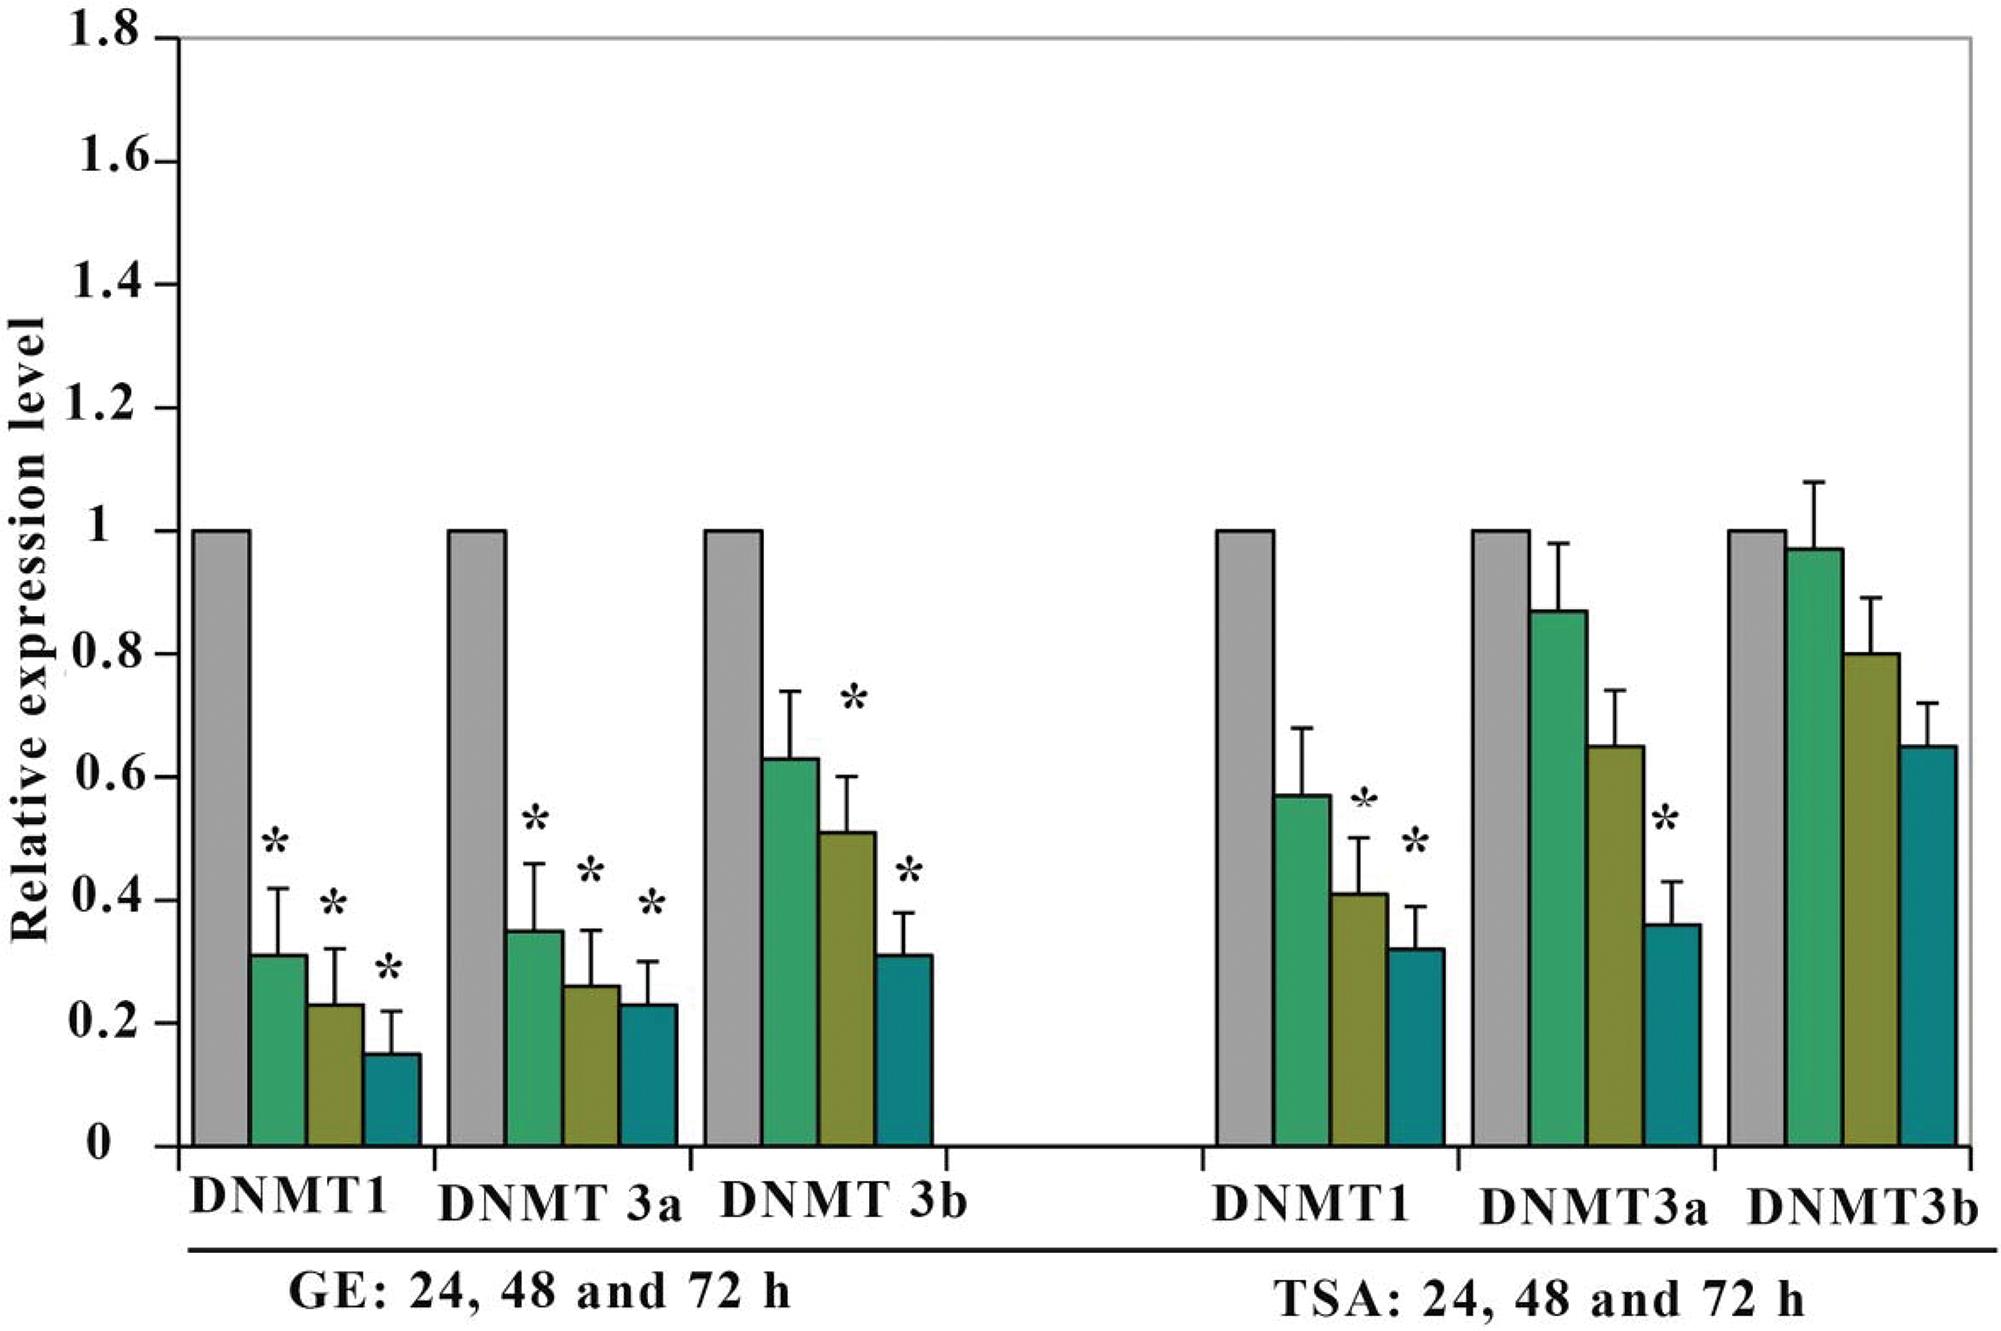 Relative expression levels of DNMT1, DNMT3a and DNMT3b.